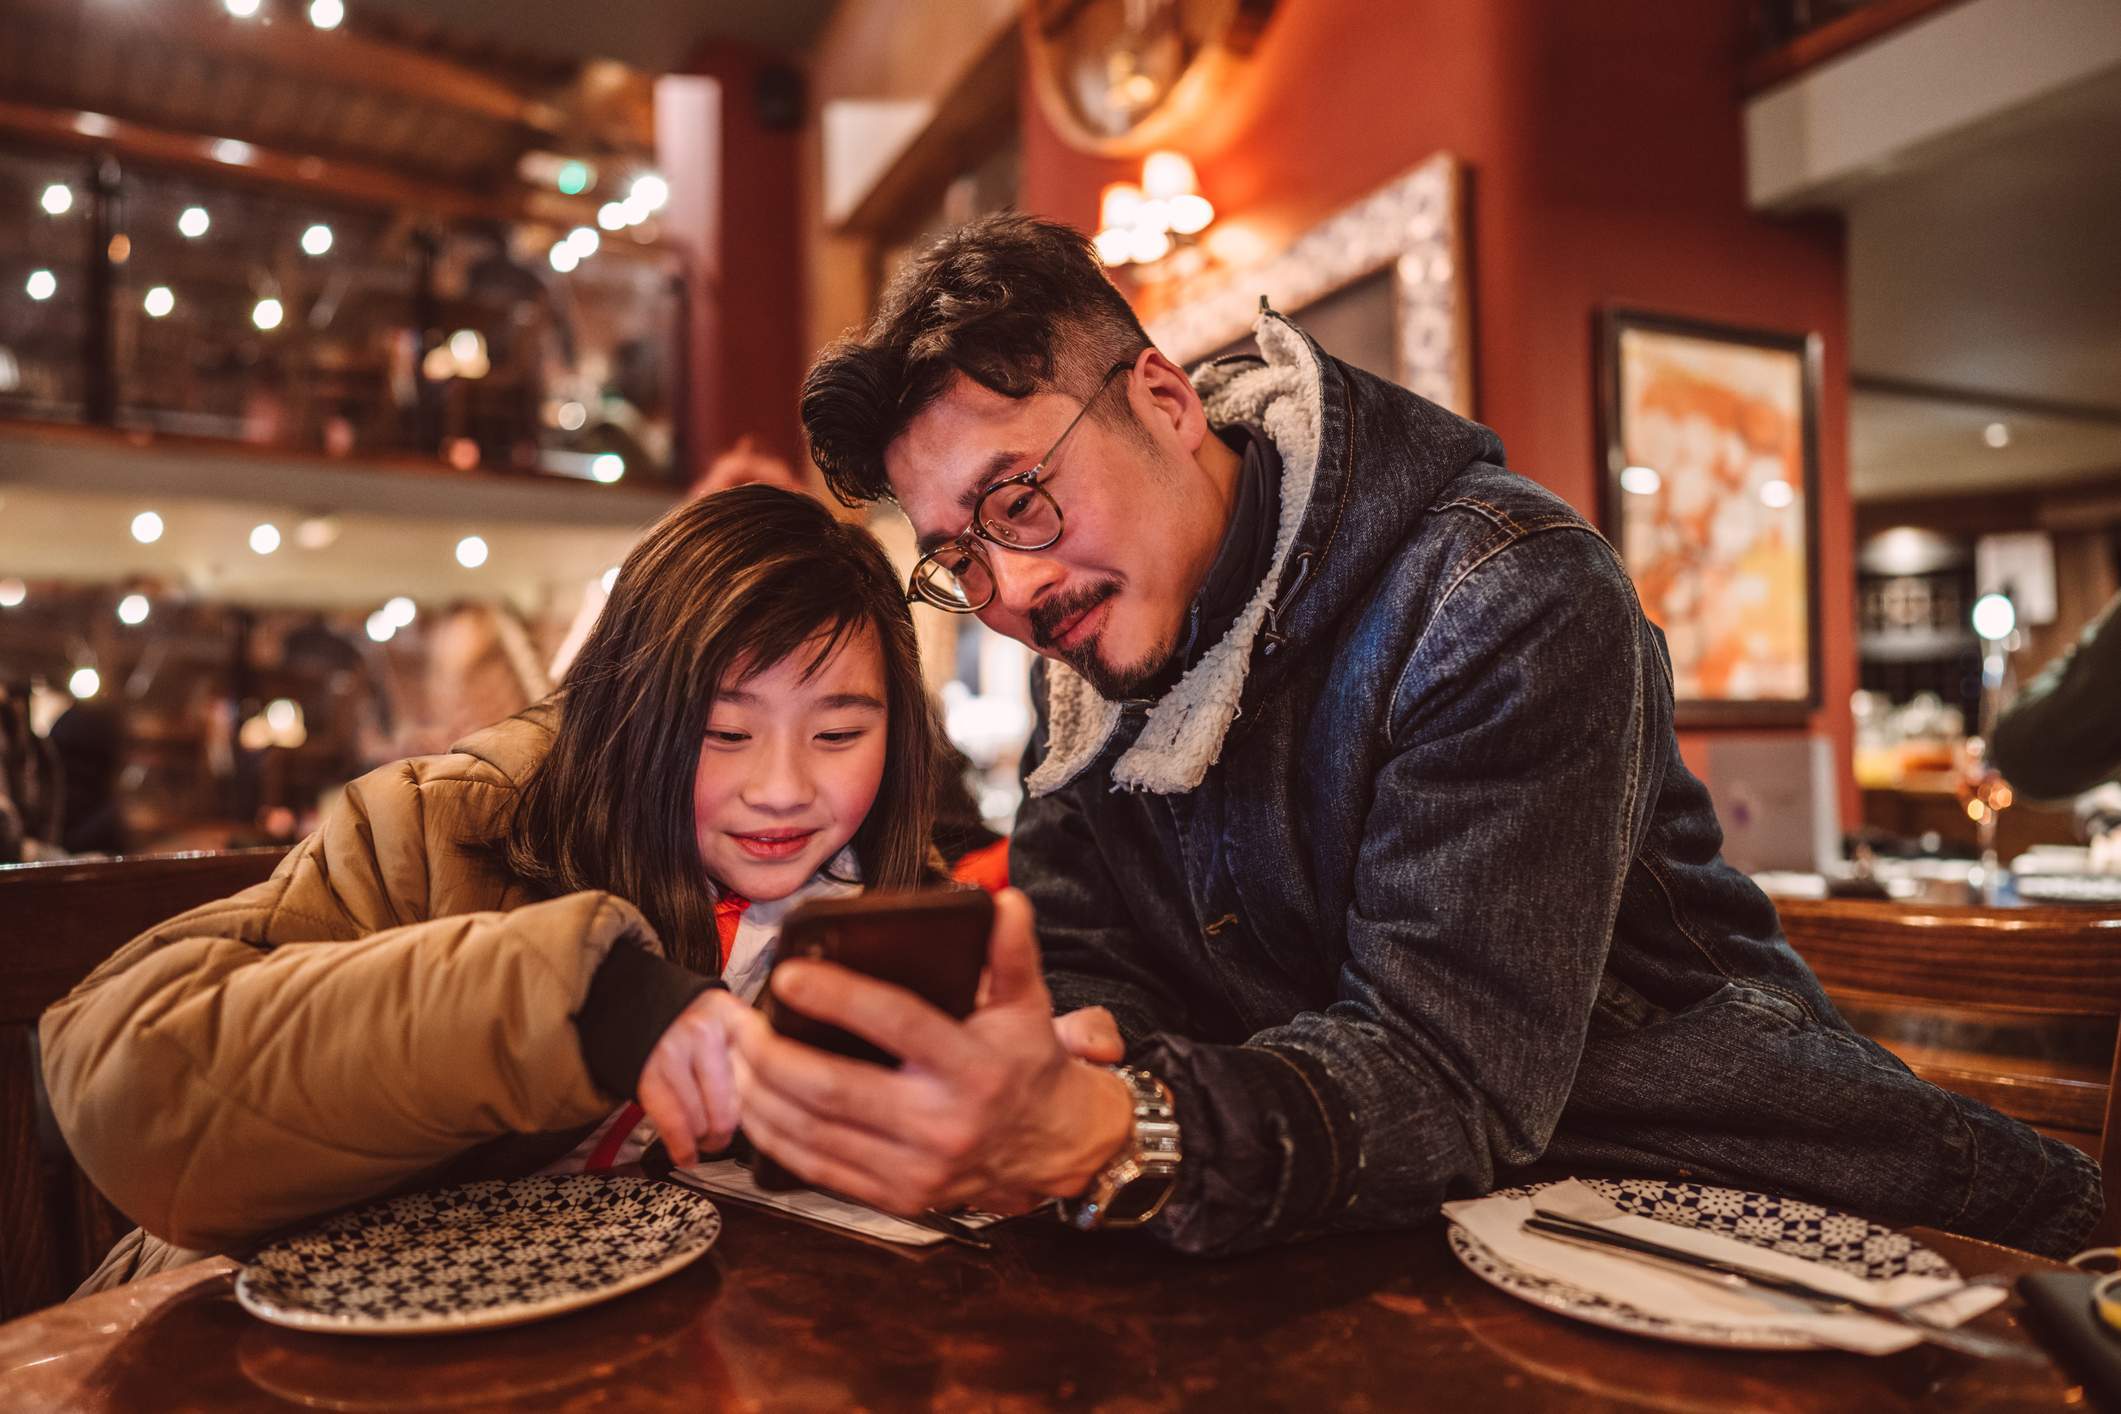 Image depicts a child and their parent using a phone together while sitting at a table in a restaurant. 